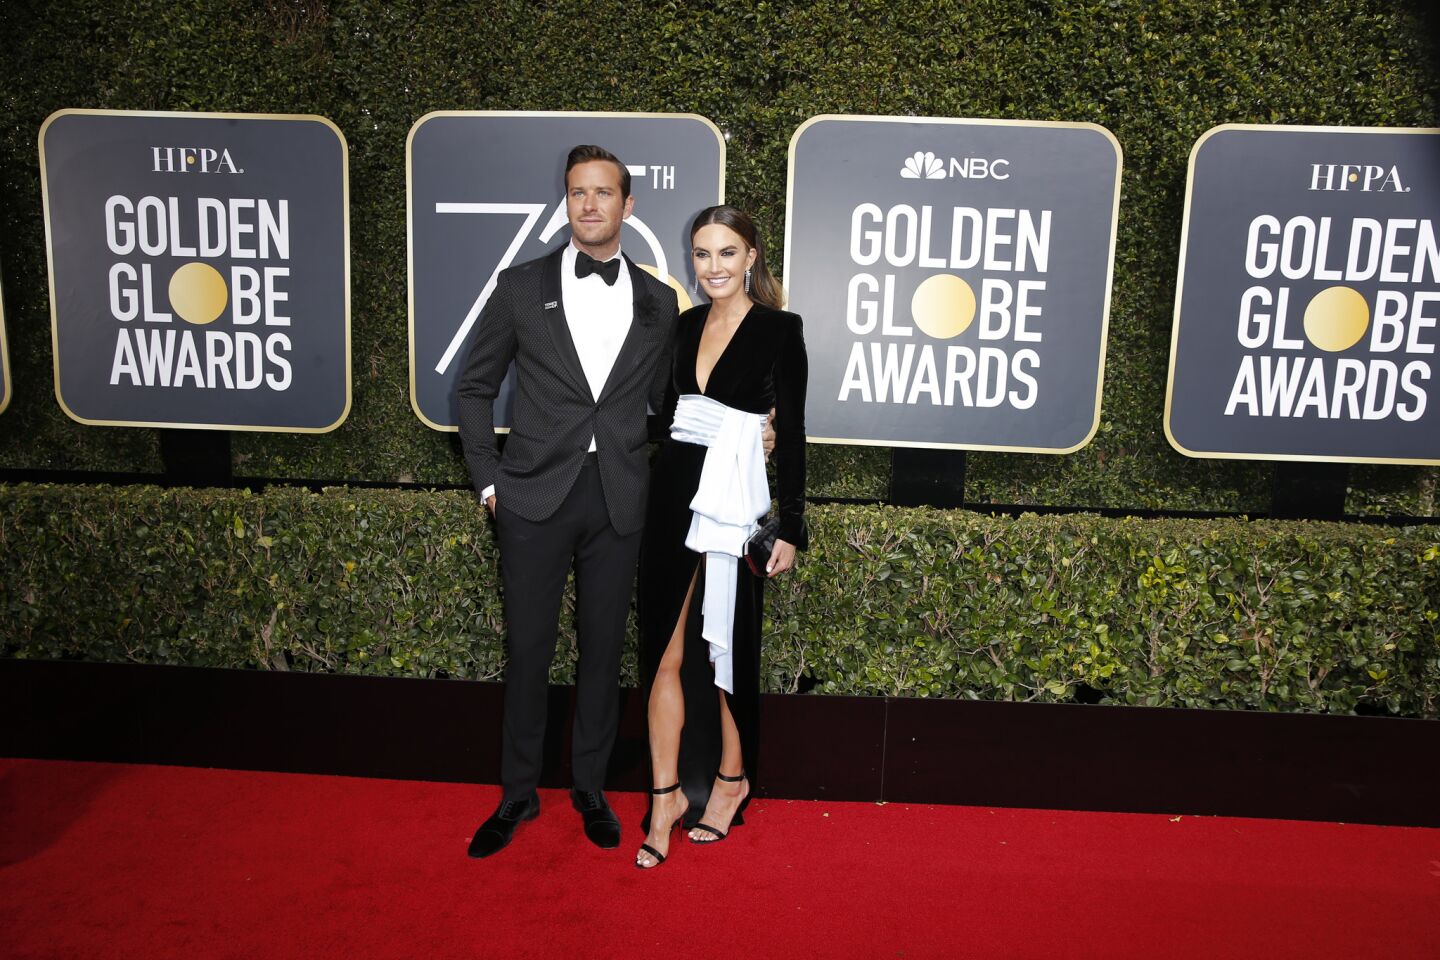 Golden Globes style trends: Belts / sashes